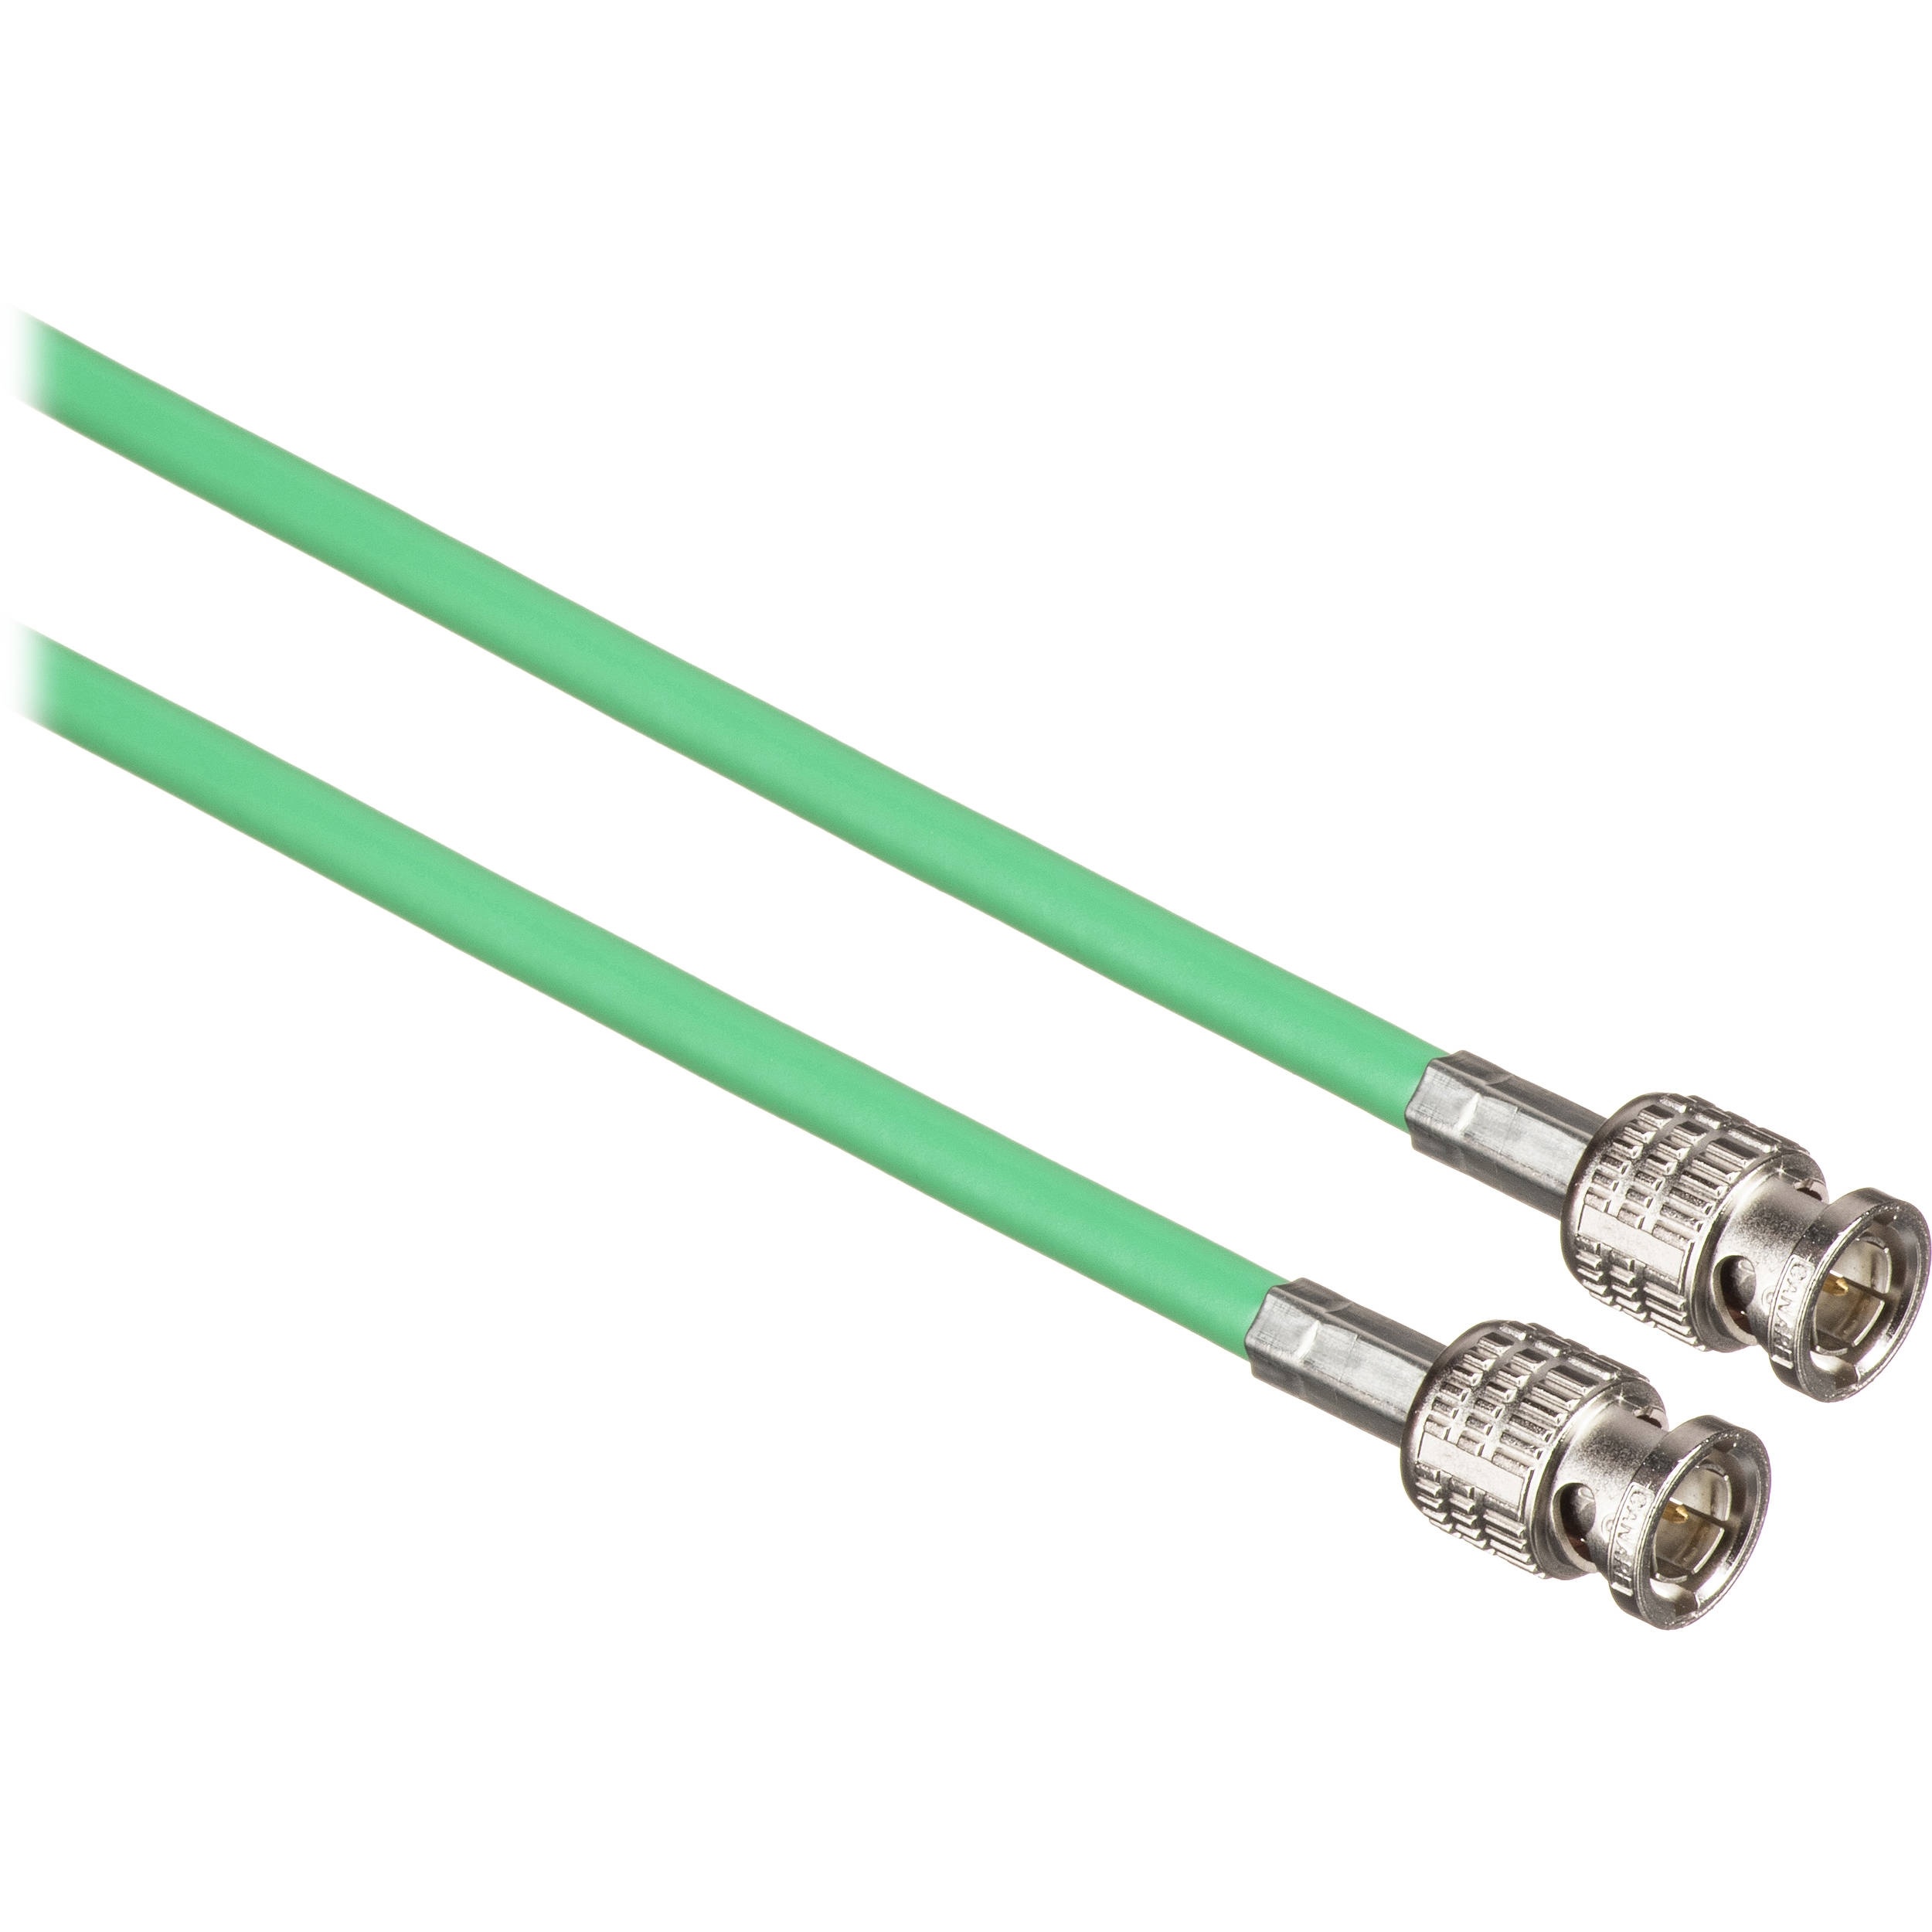 Canare 3' L-3CFW RG59 HD-SDI Coaxial Cable with Male BNCs (Green)